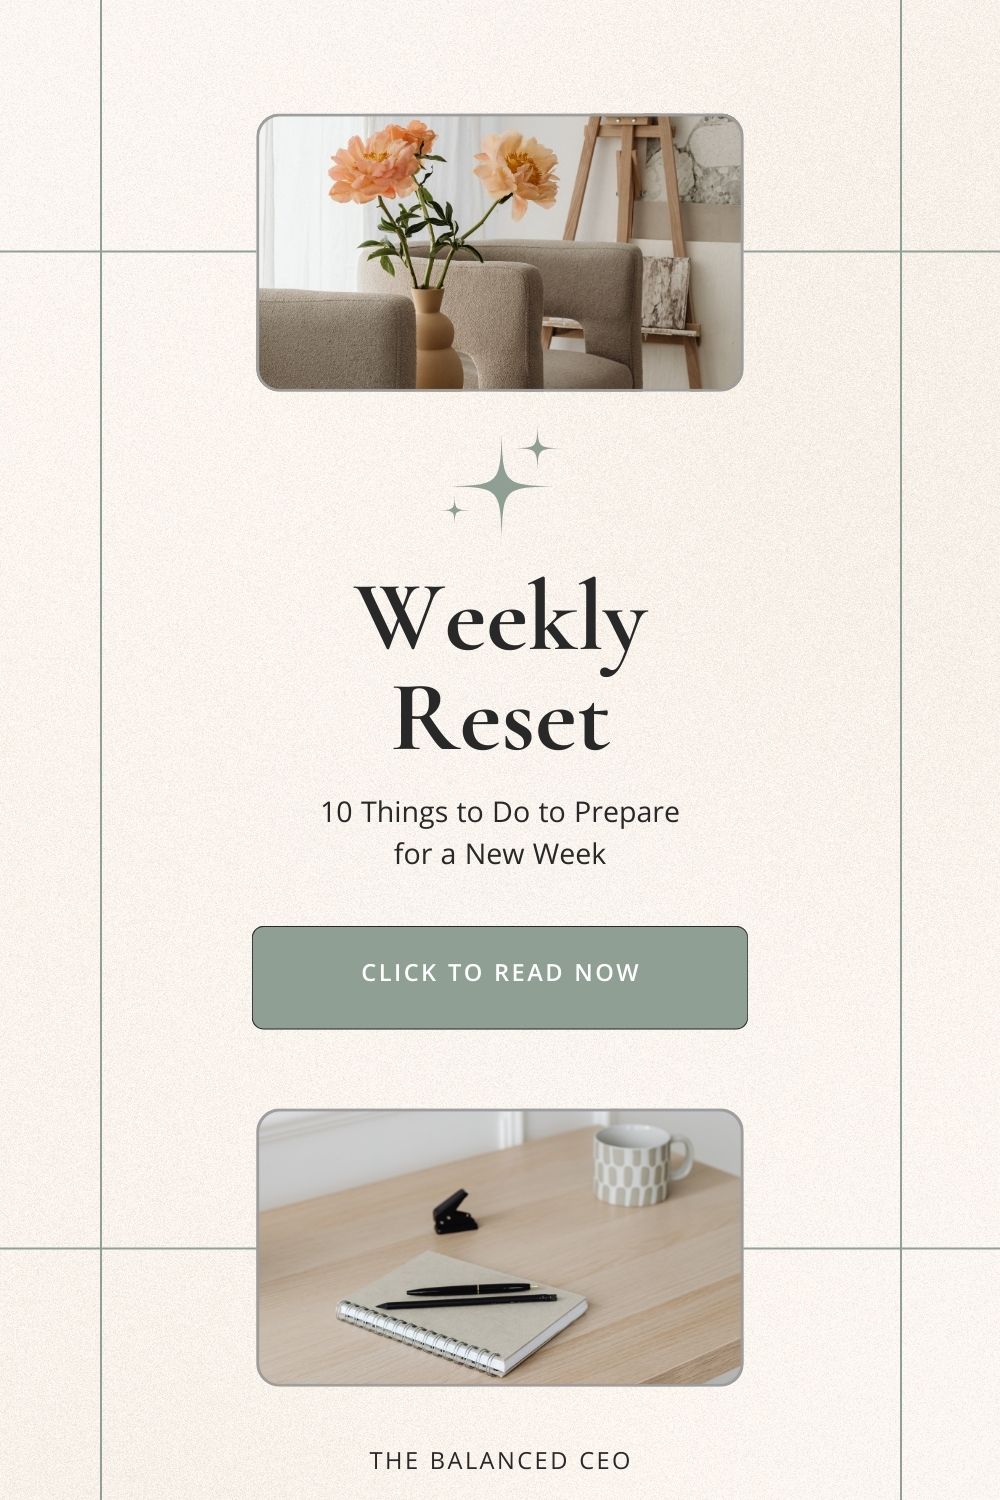 Weekly Reset: 10 Things to Do to Prepare for a New Week